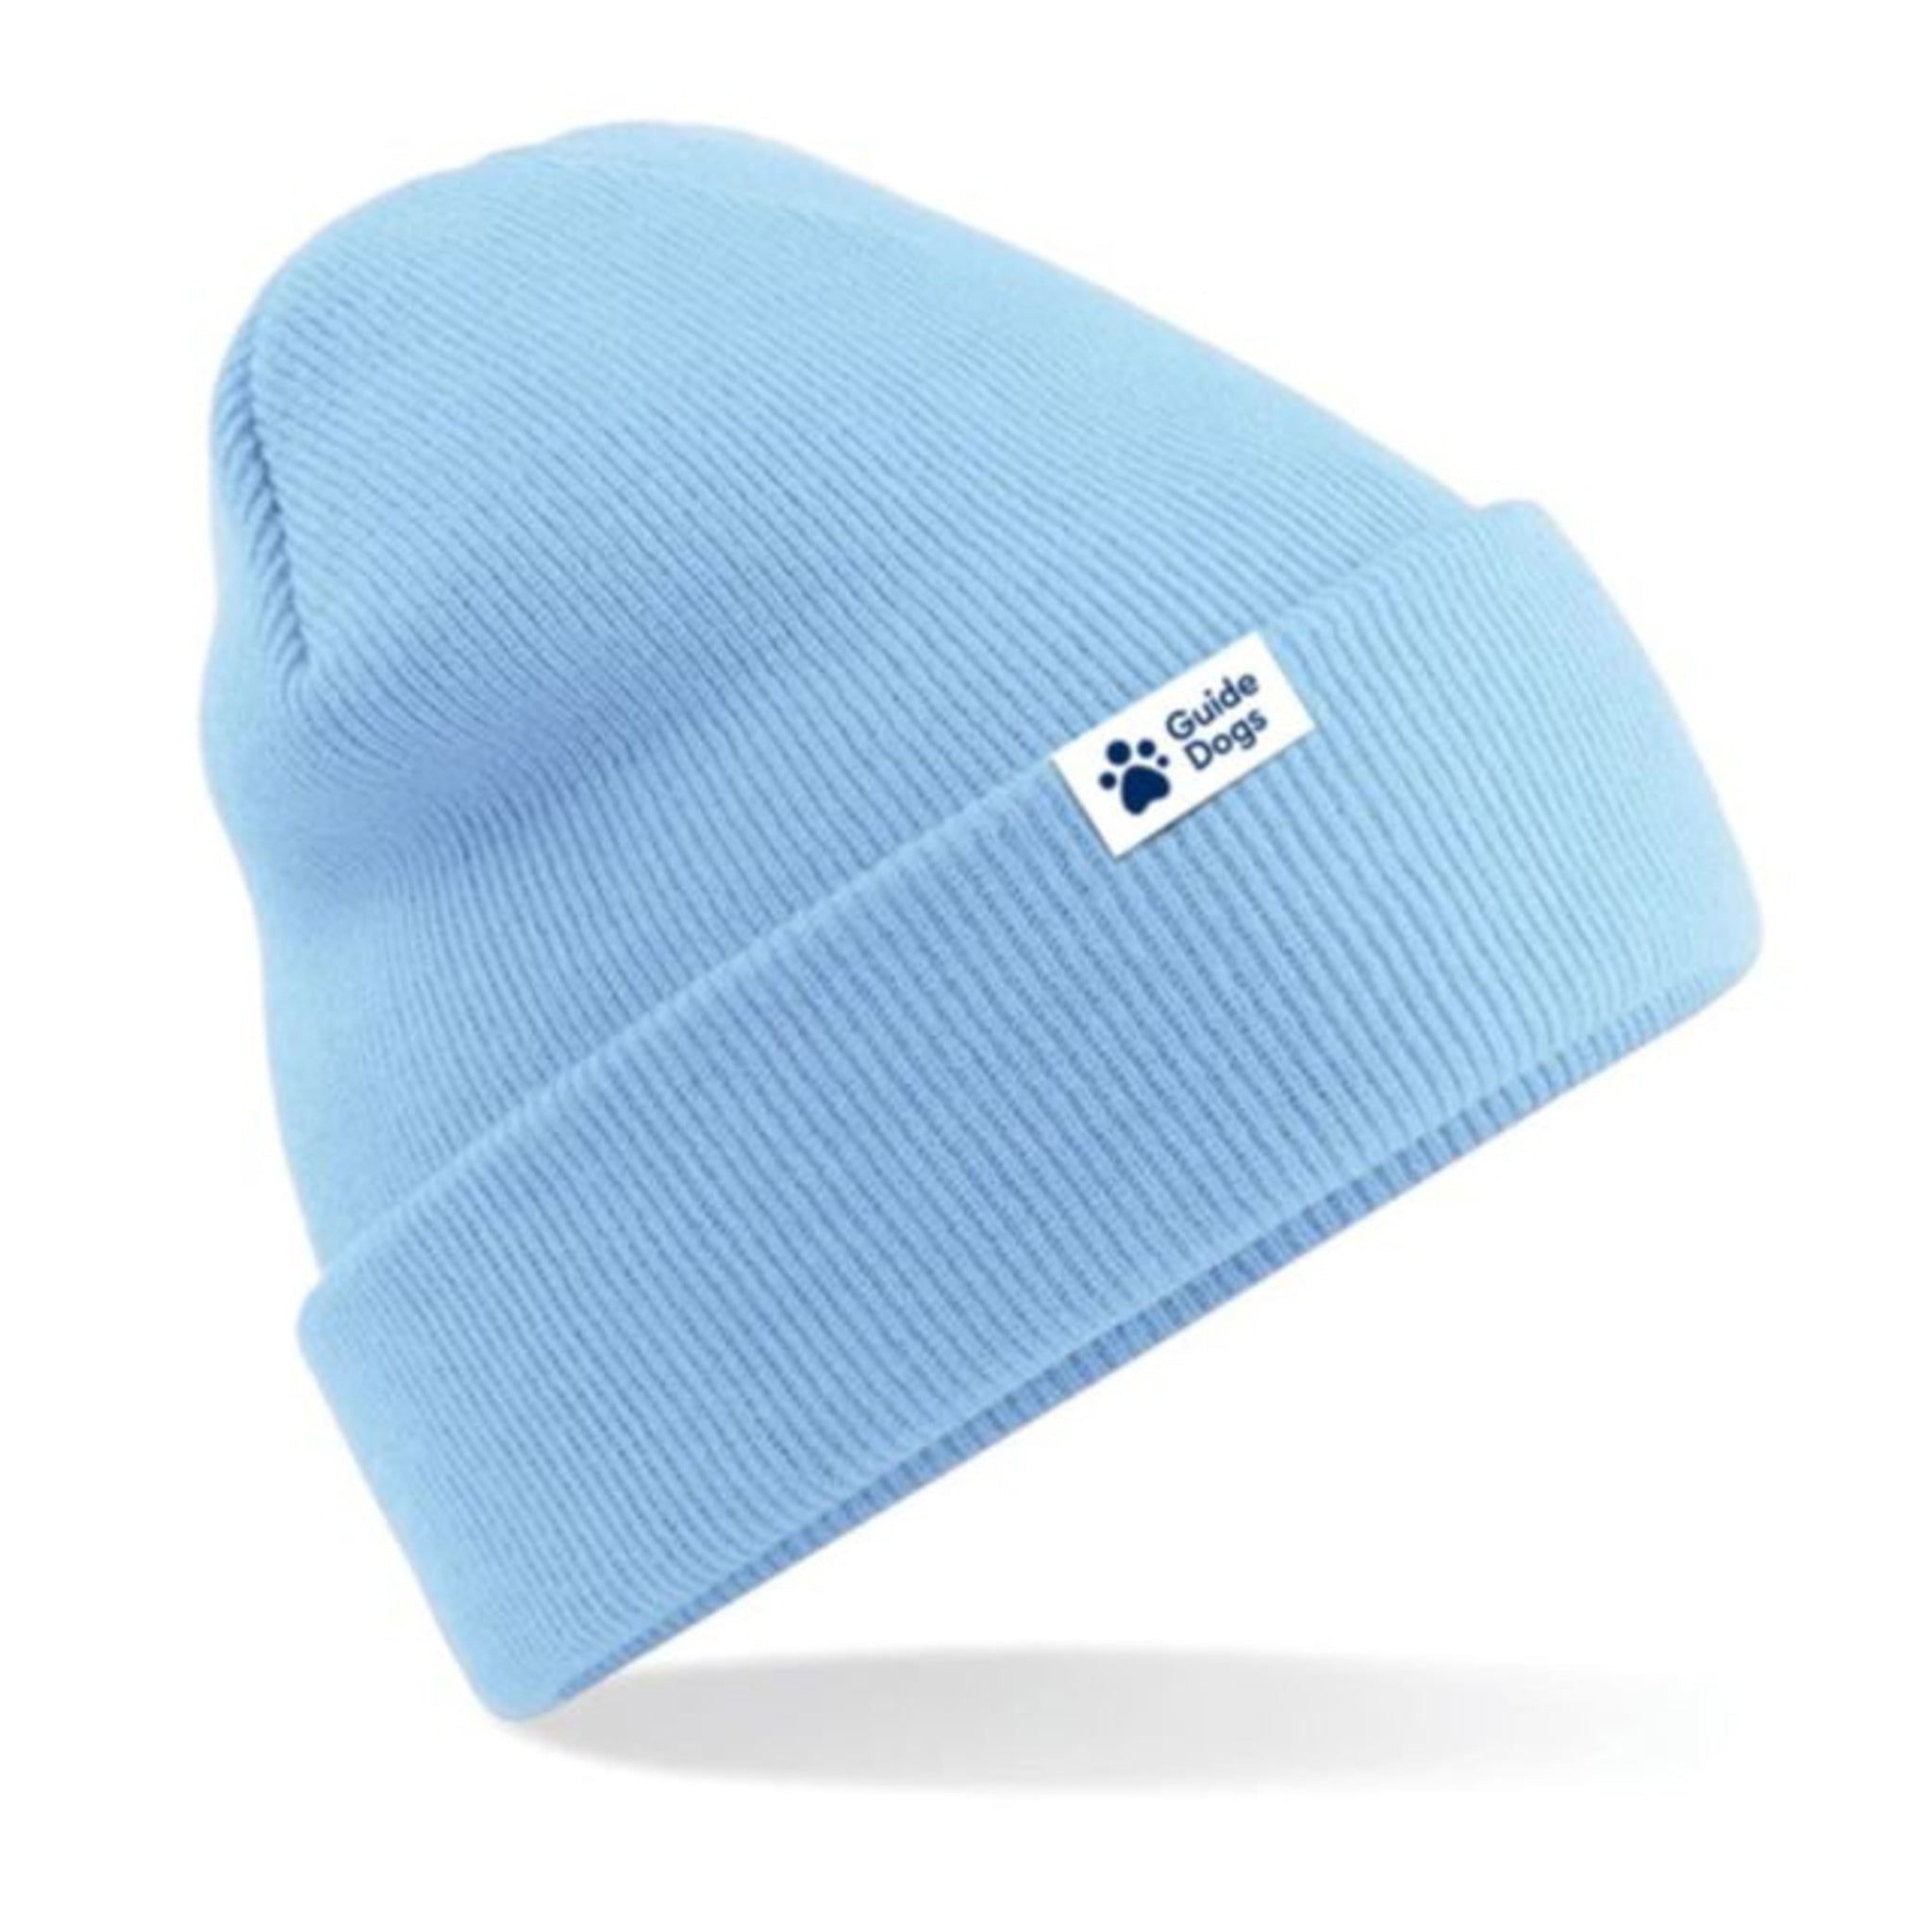 An image of the light blue Guide Dogs beanie hat.